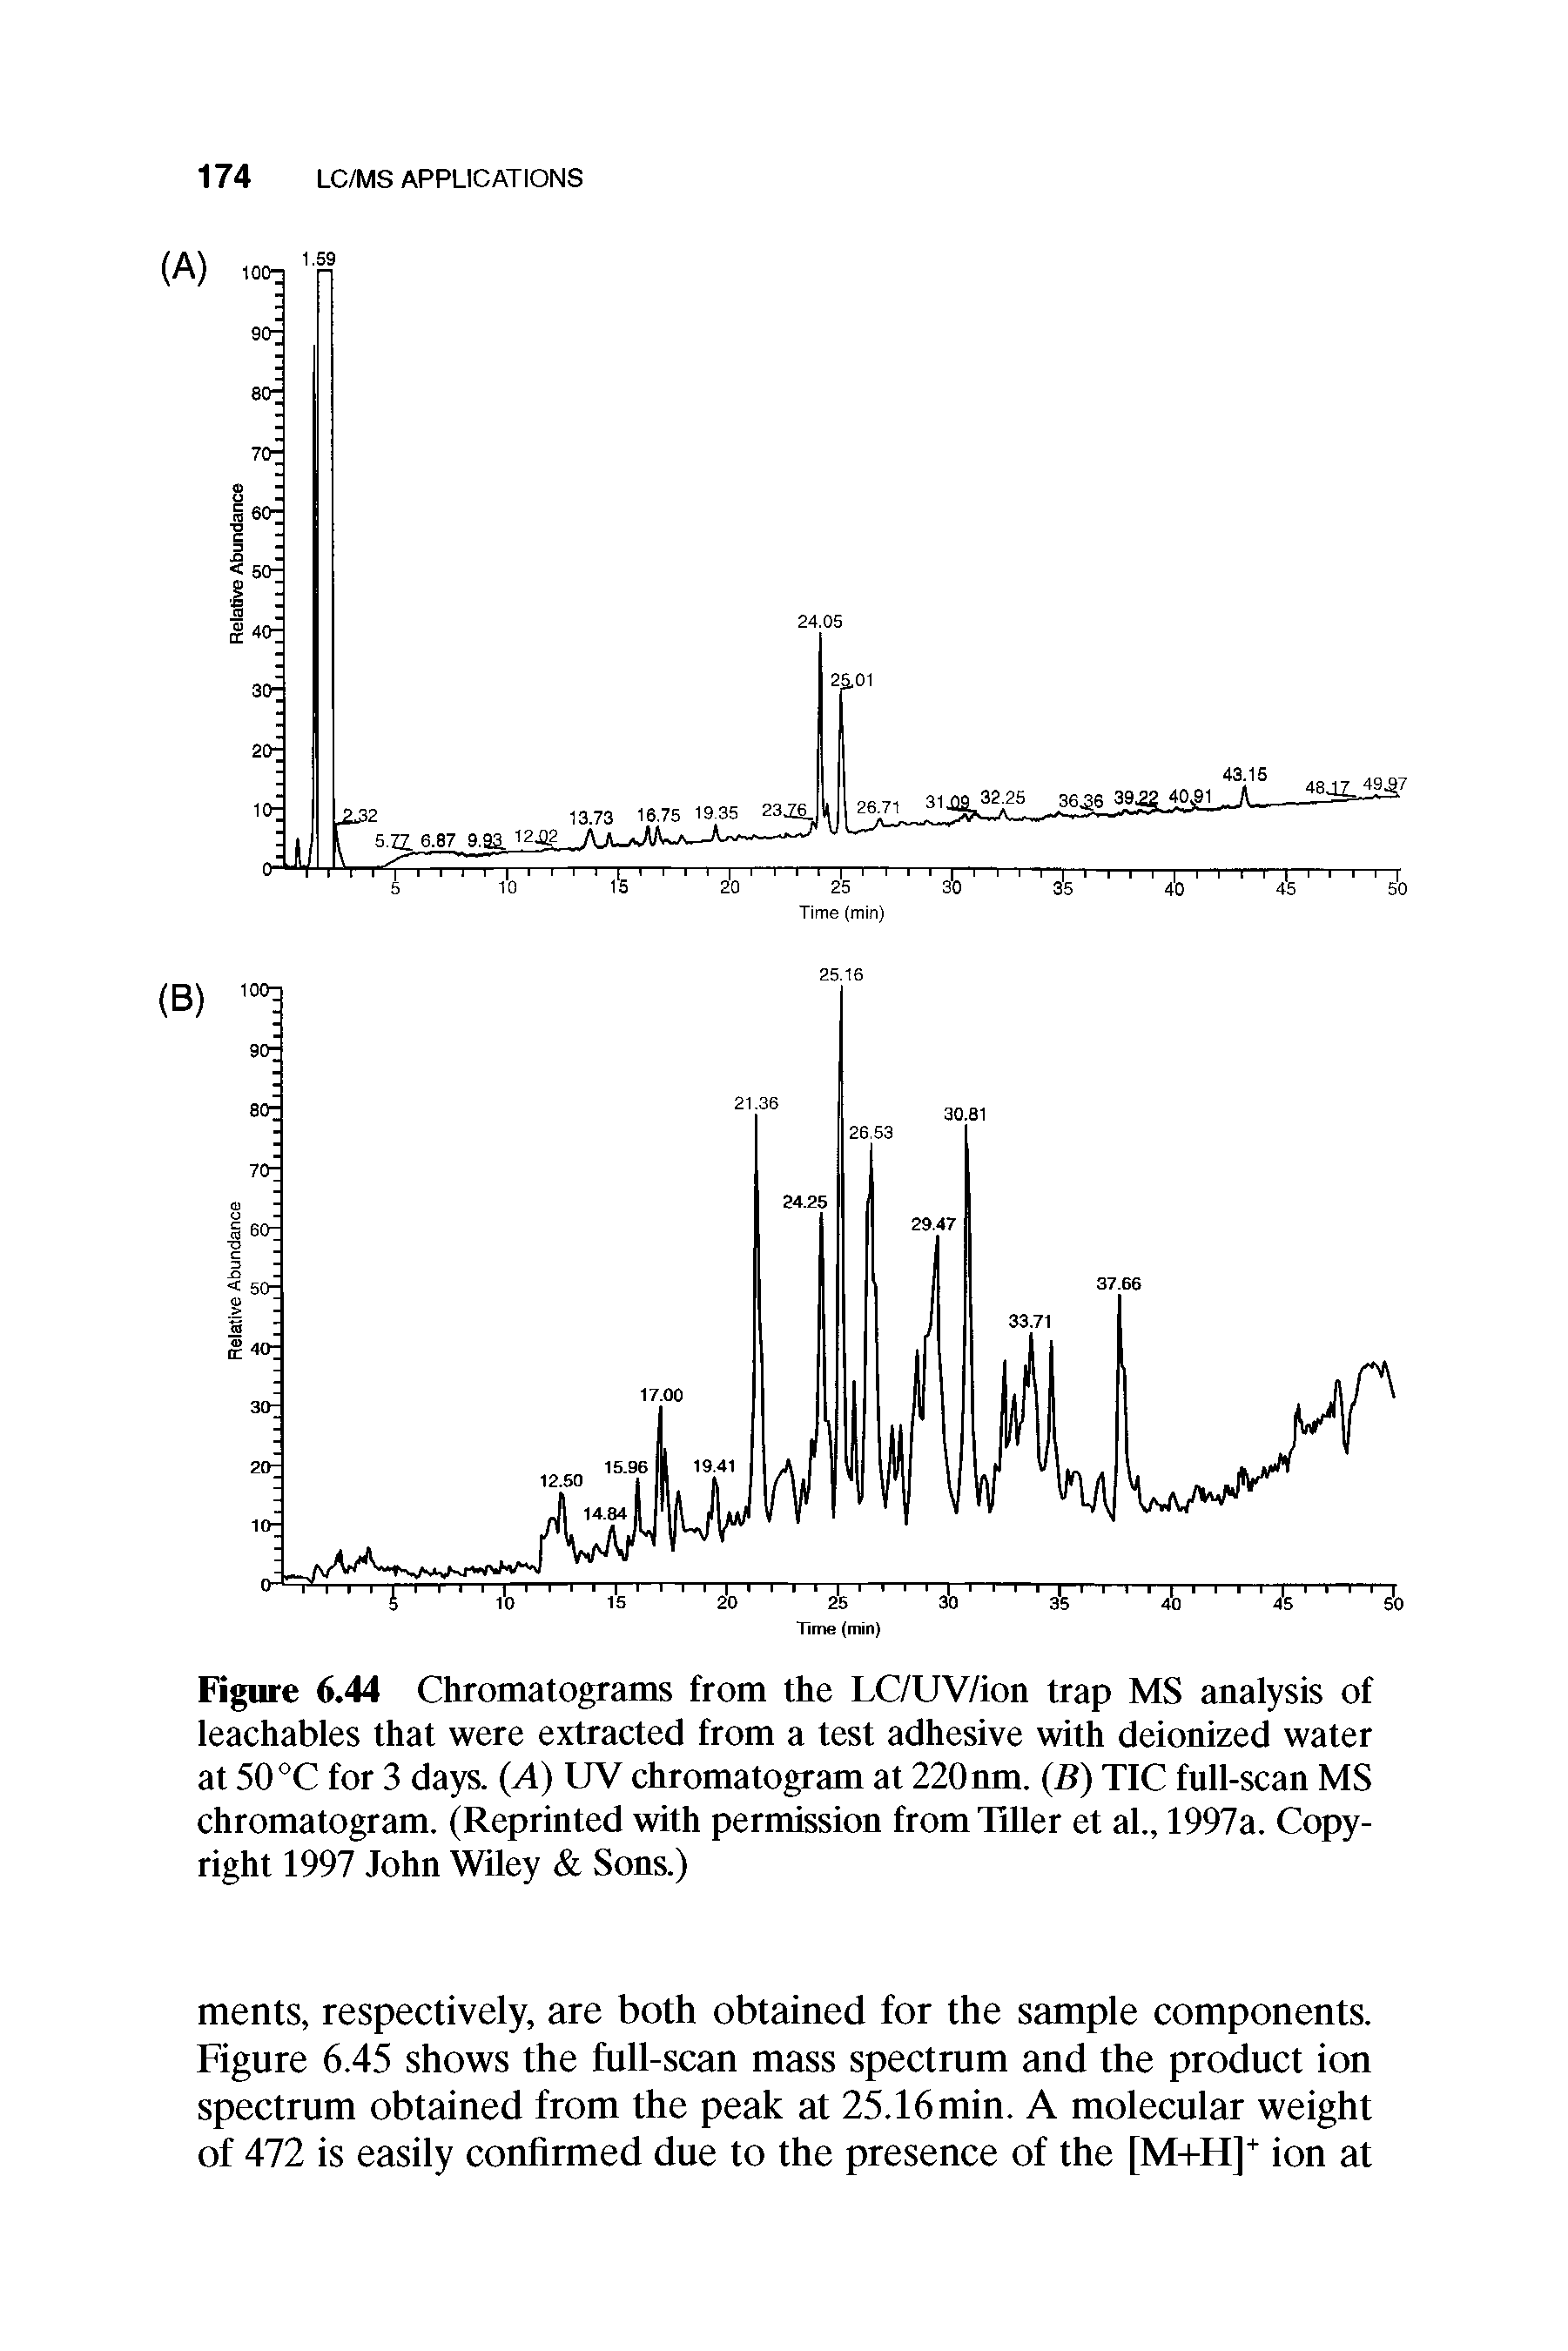 Figure 6.44 Chromatograms from the LC/UV/ion trap MS analysis of leachables that were extracted from a test adhesive with deionized water at 50°C for 3 days. (A) UV chromatogram at 220nm. (B) TIC full-scan MS chromatogram. (Reprinted with permission from Tiller et al., 1997a. Copyright 1997 John Wiley Sons.)...